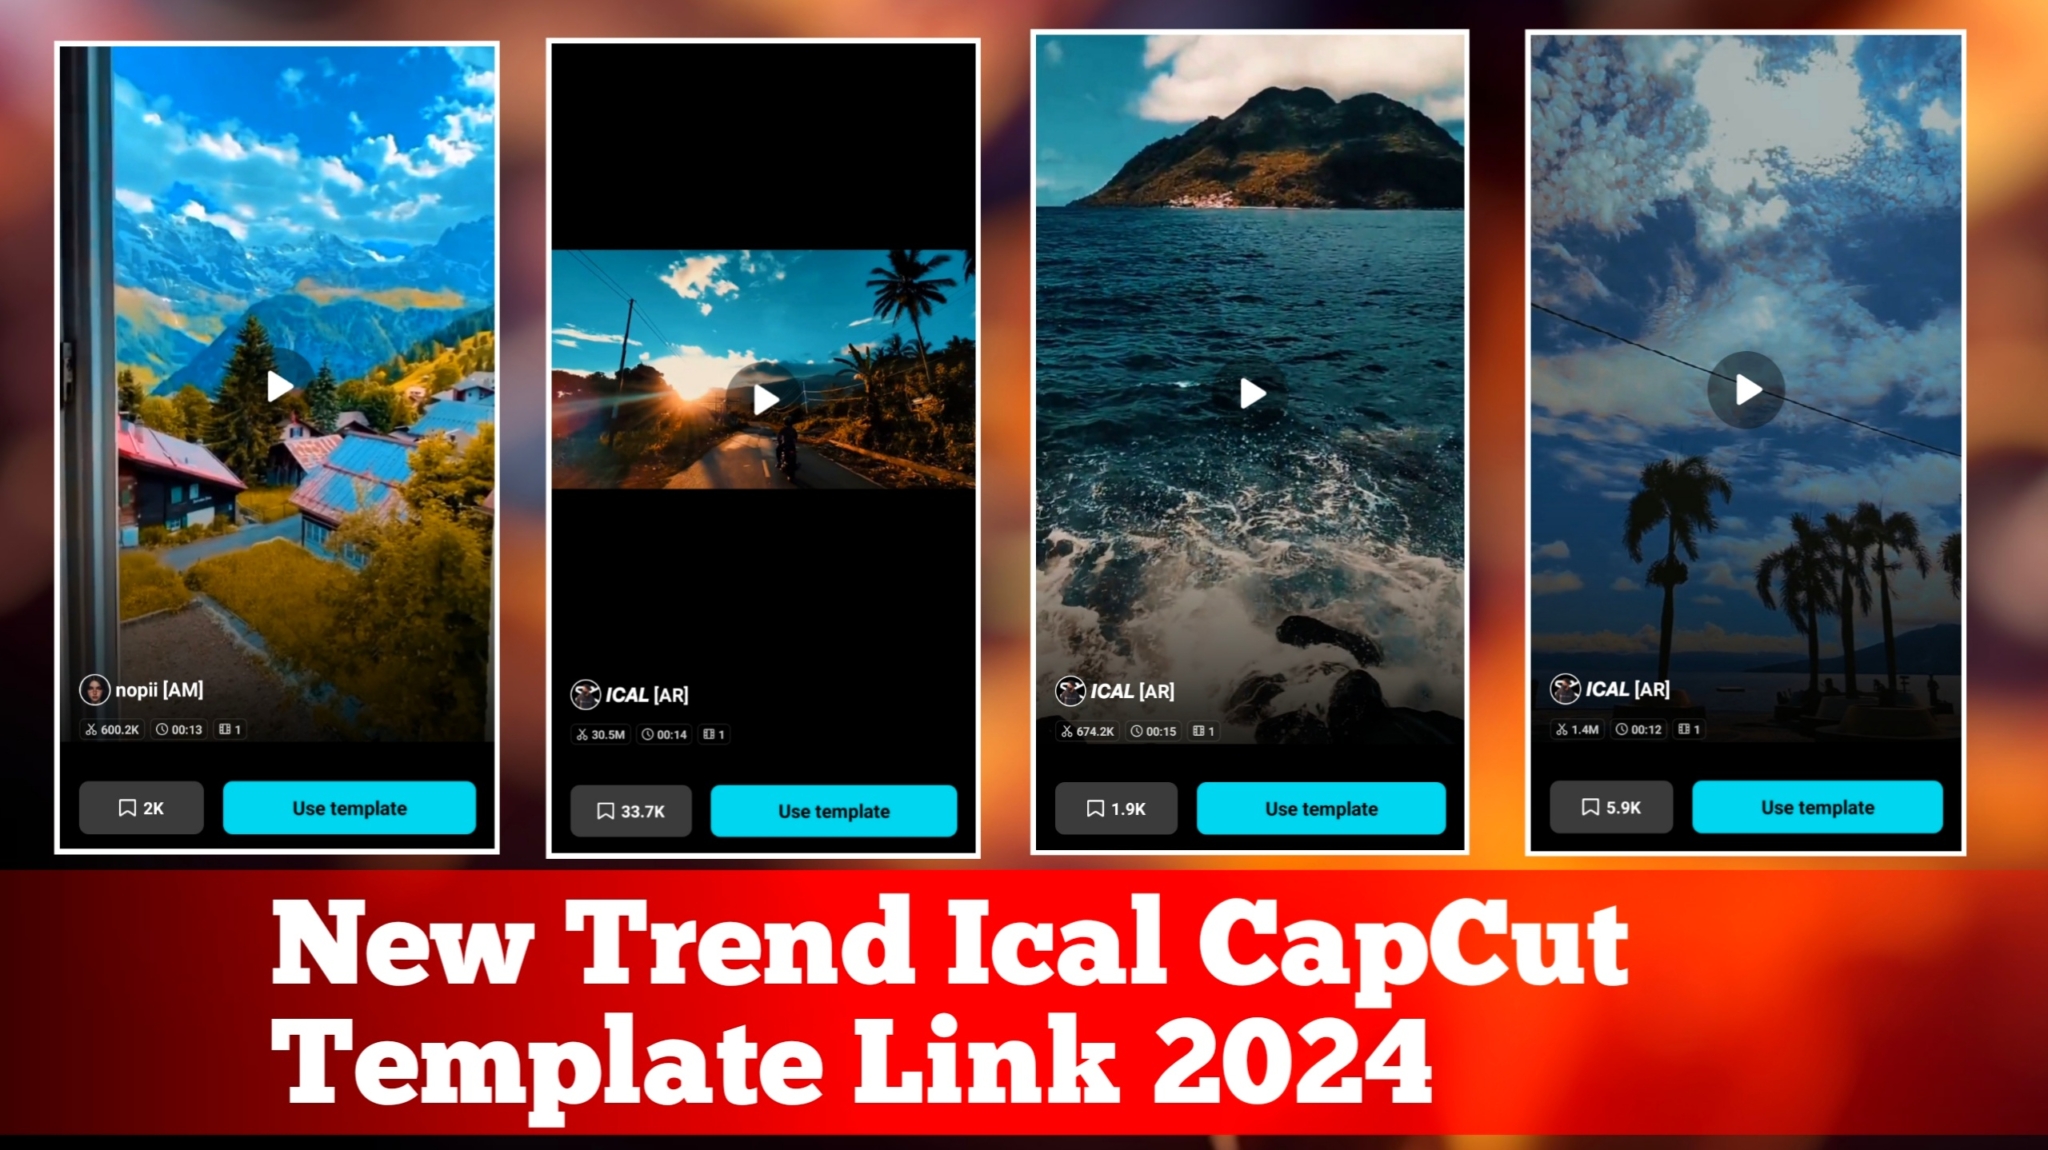 Ical CapCut Template Link 2024 New Trend 100% Working